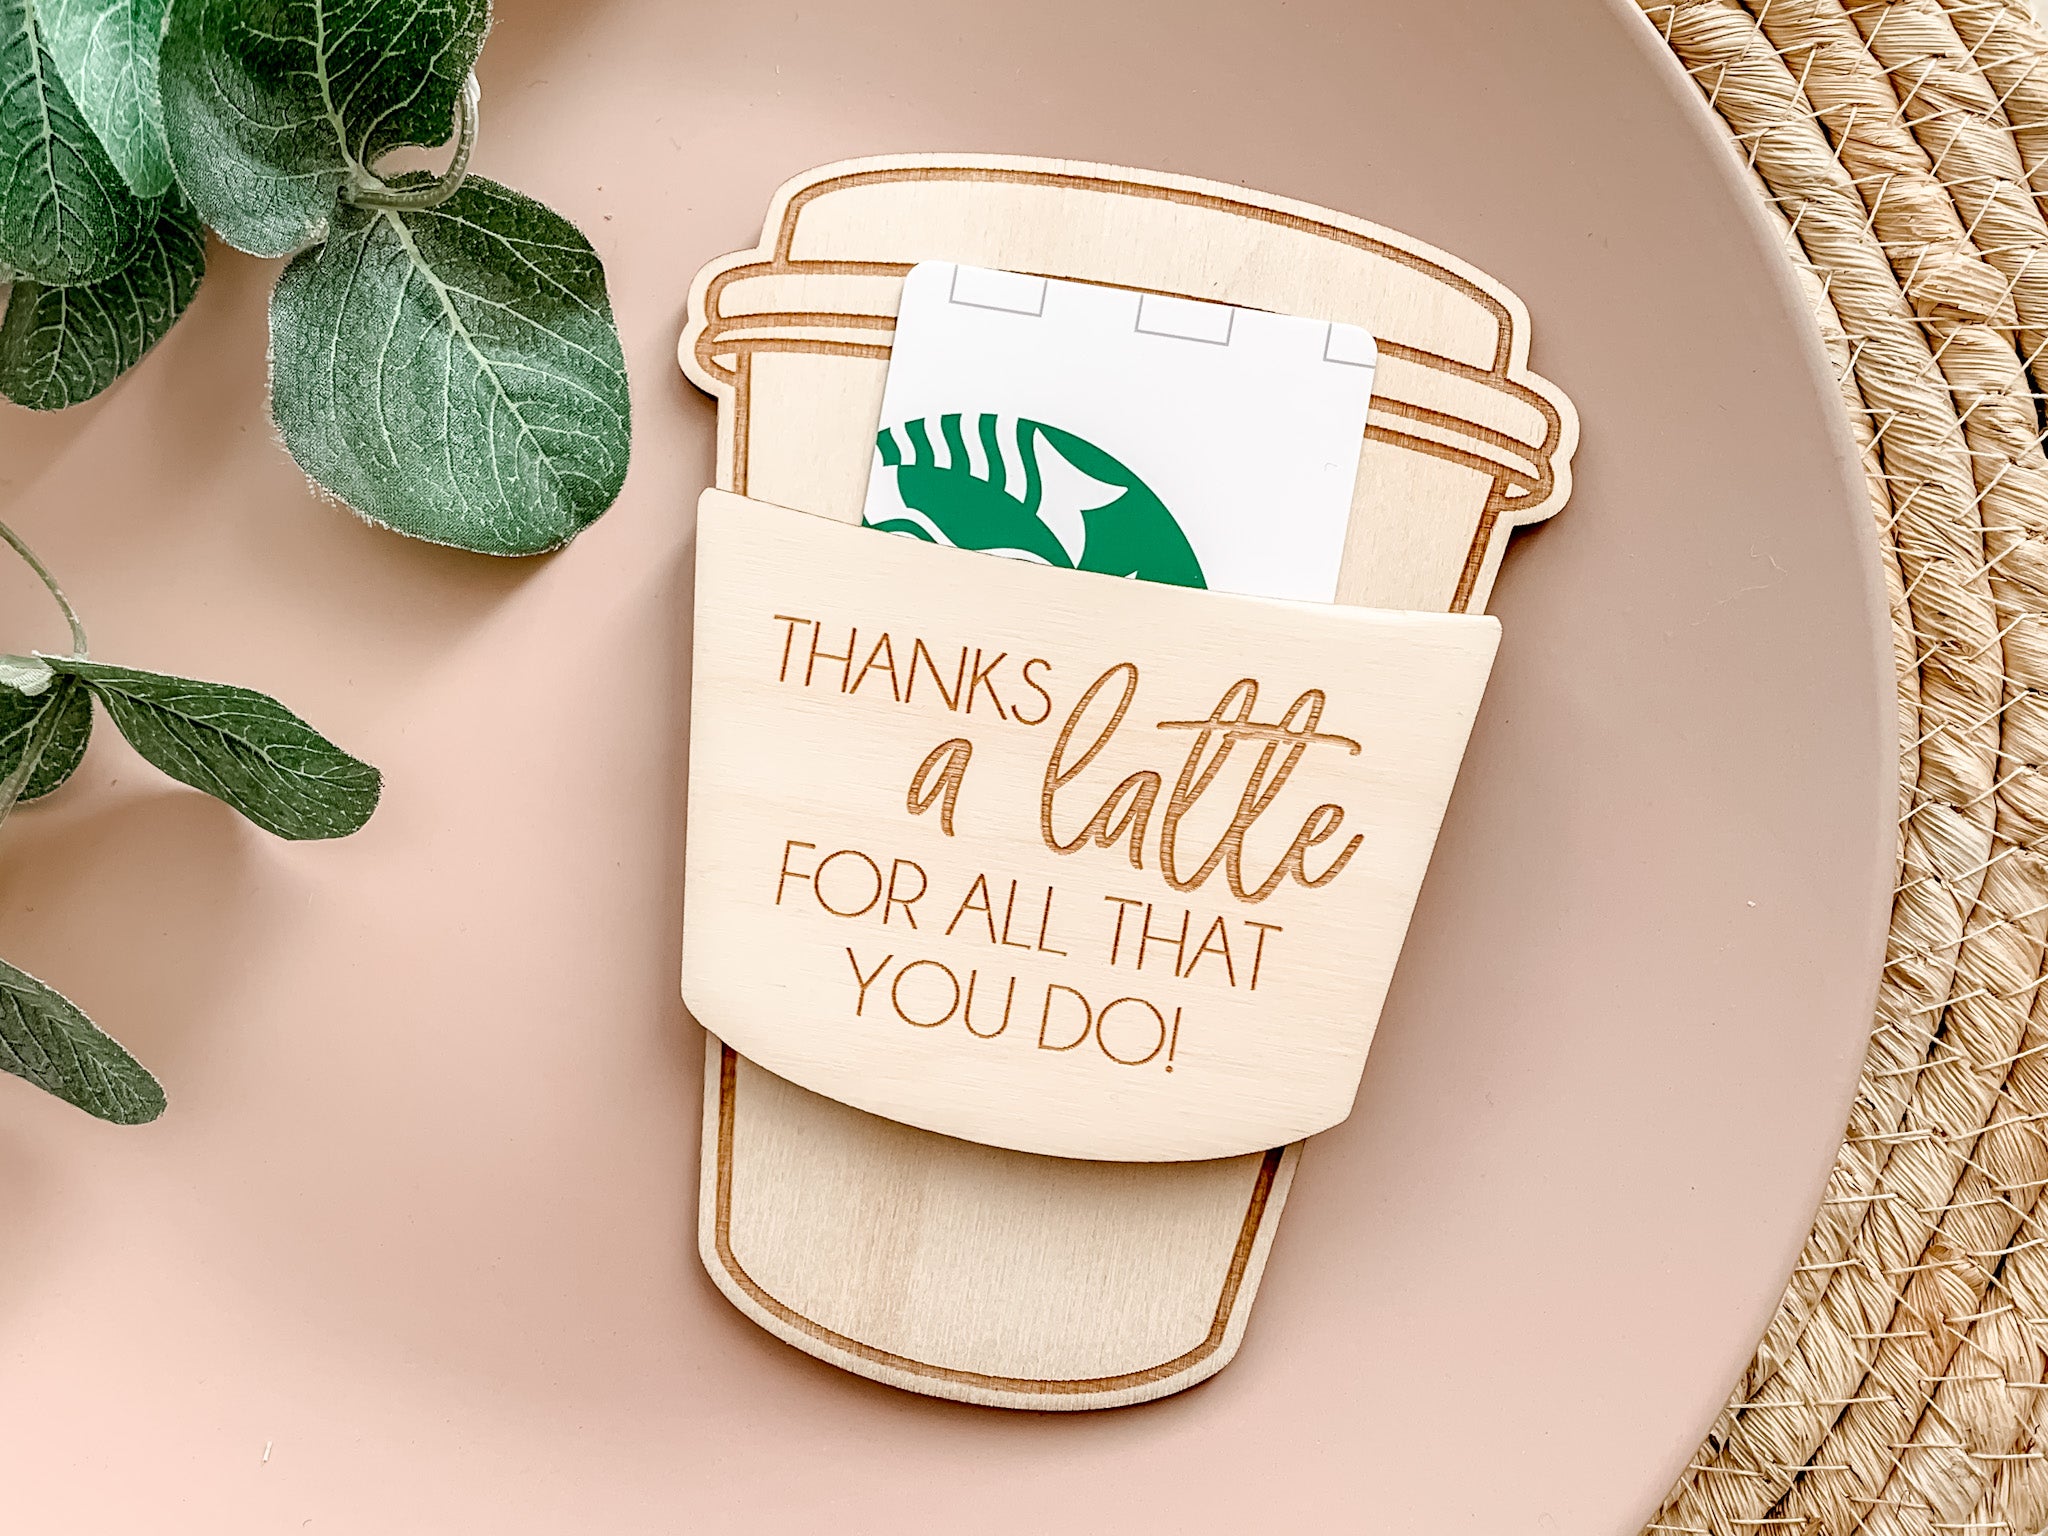 Teacher Appreciation Gift Tag Printable, “Thanks a Latte for all you do!”  Green Cup